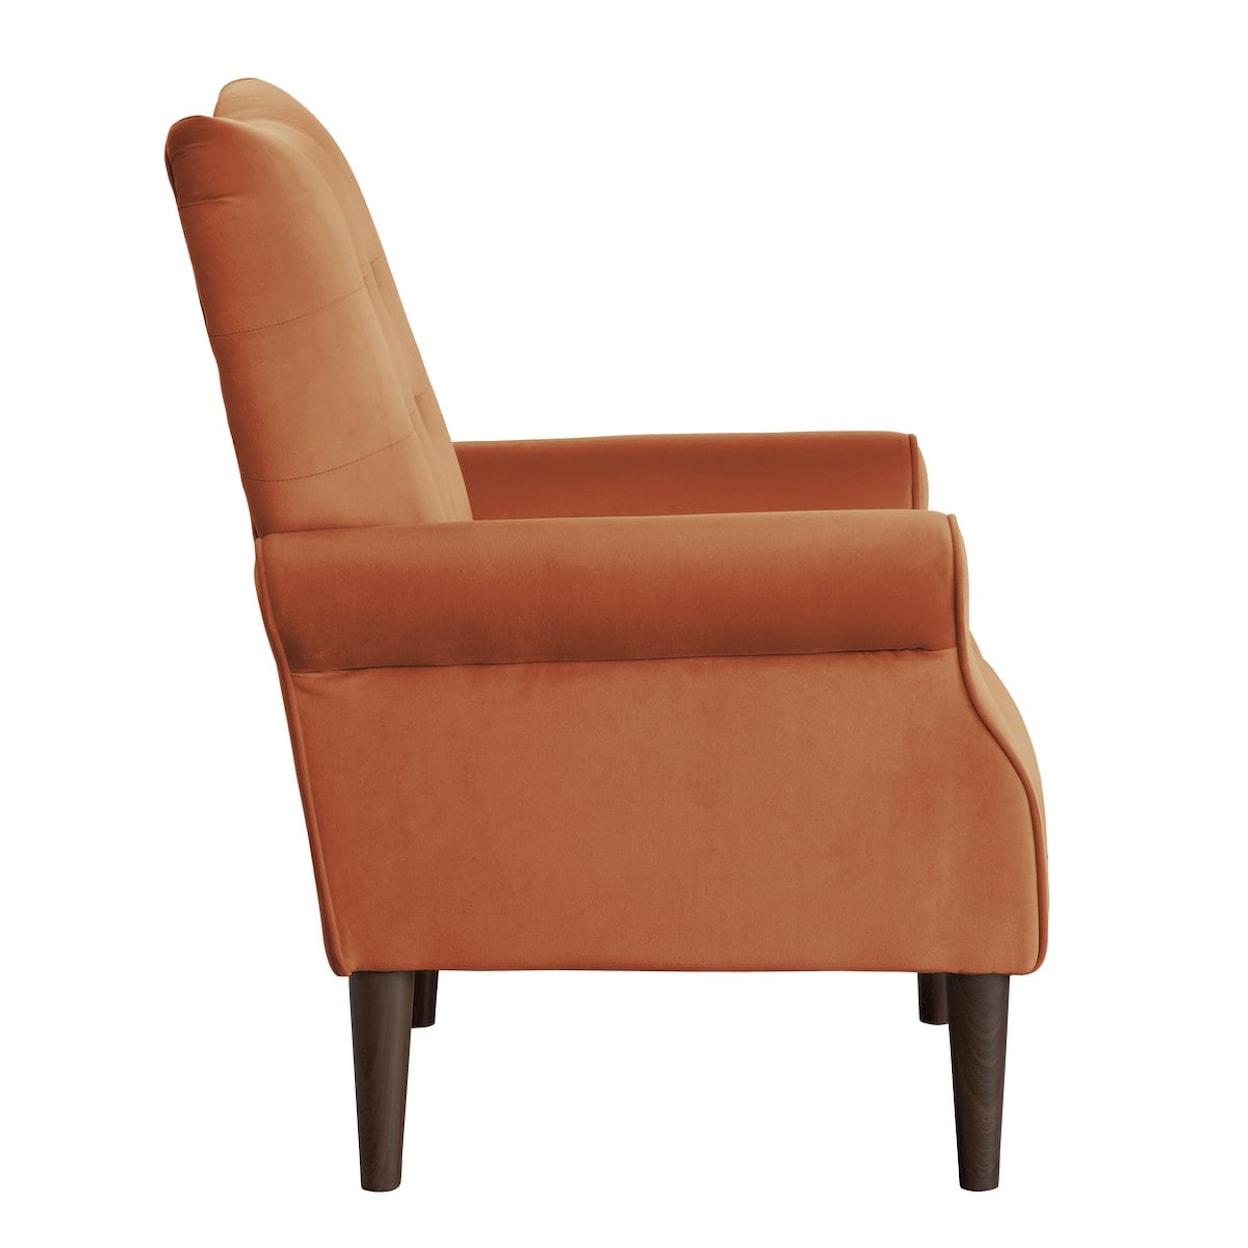 Homelegance Kyrie Stationary Accent Chair